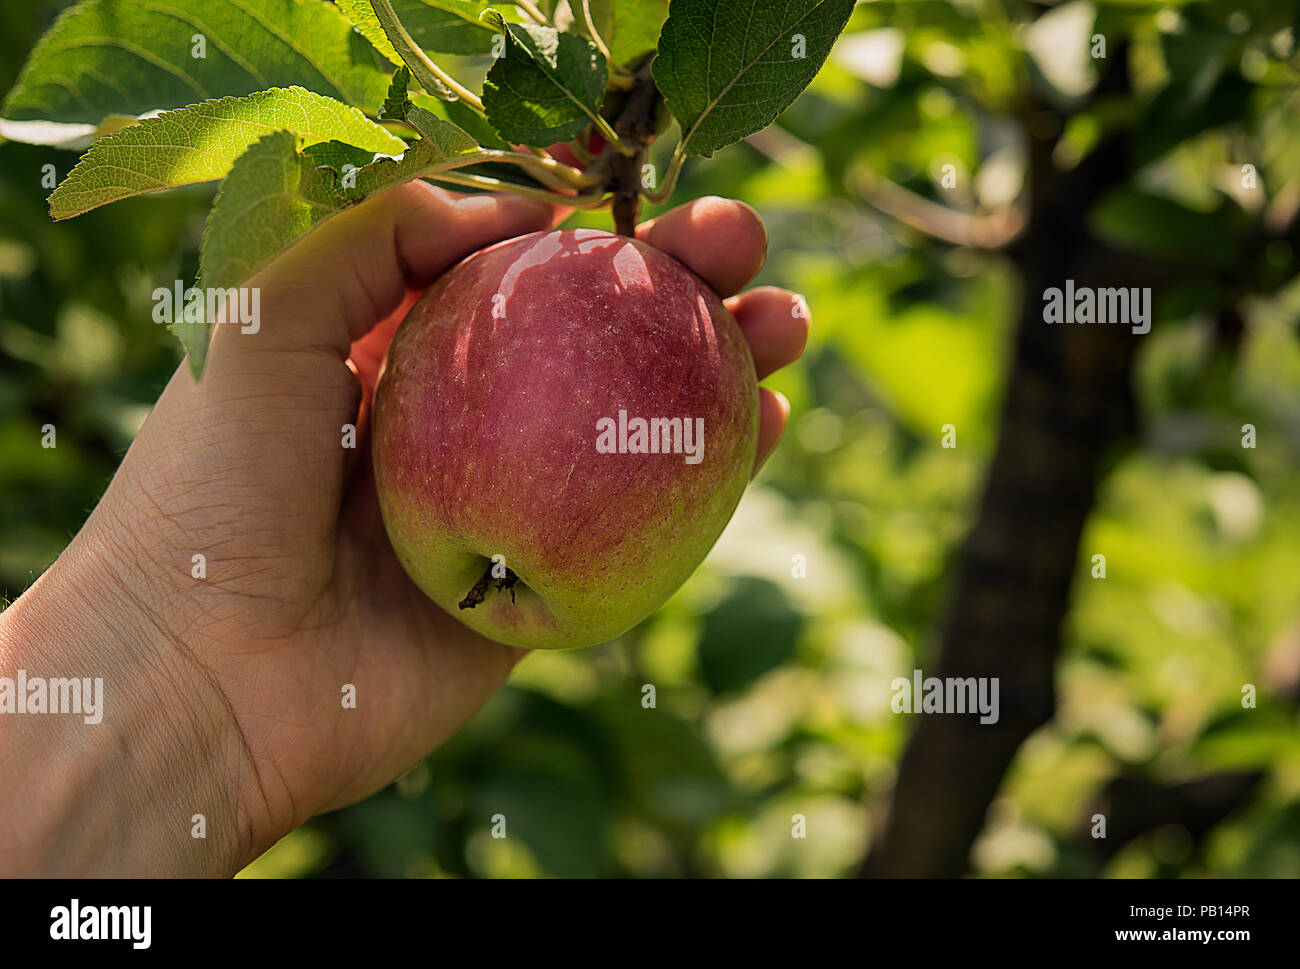 Ripe red and yellow apple with leaves on real tree branch at orchard garden. Woman's hand is holding apple just before picking it. Harvest time and he Stock Photo